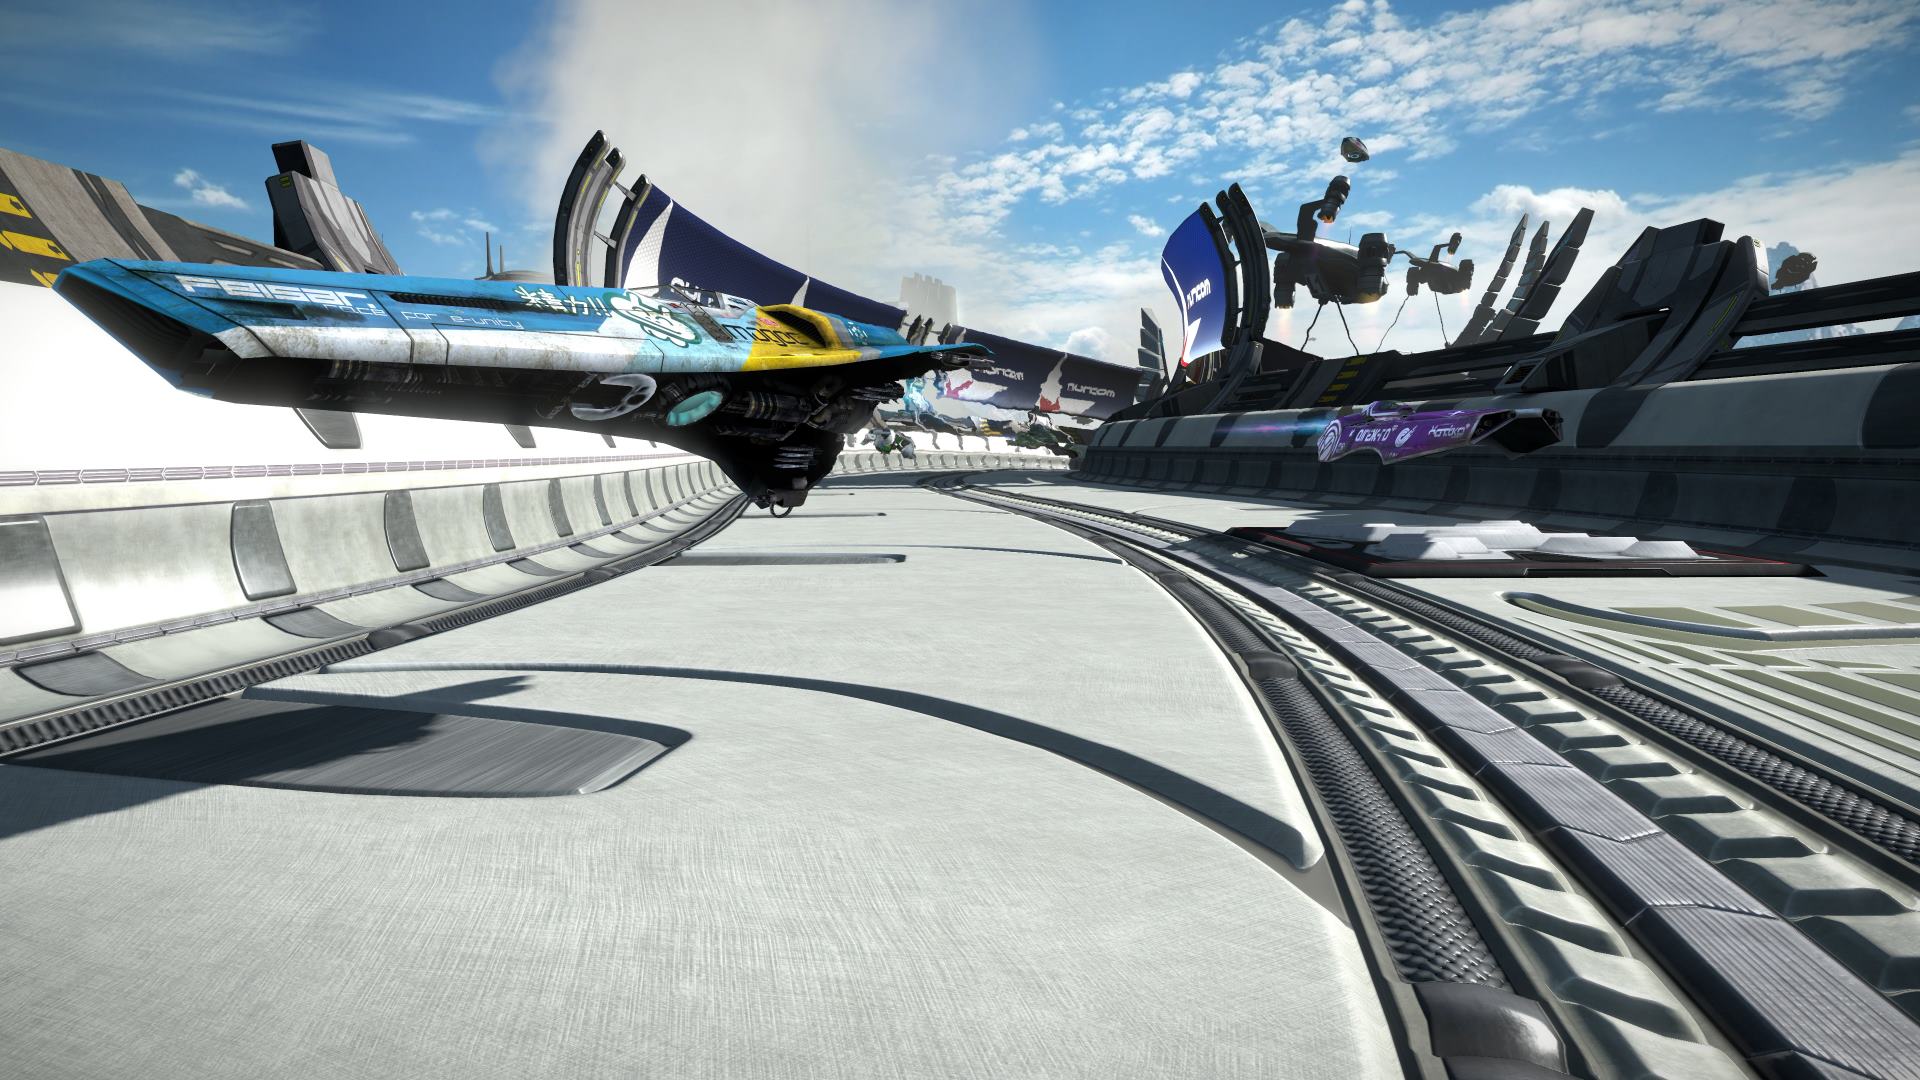 wipeout omega collection psn